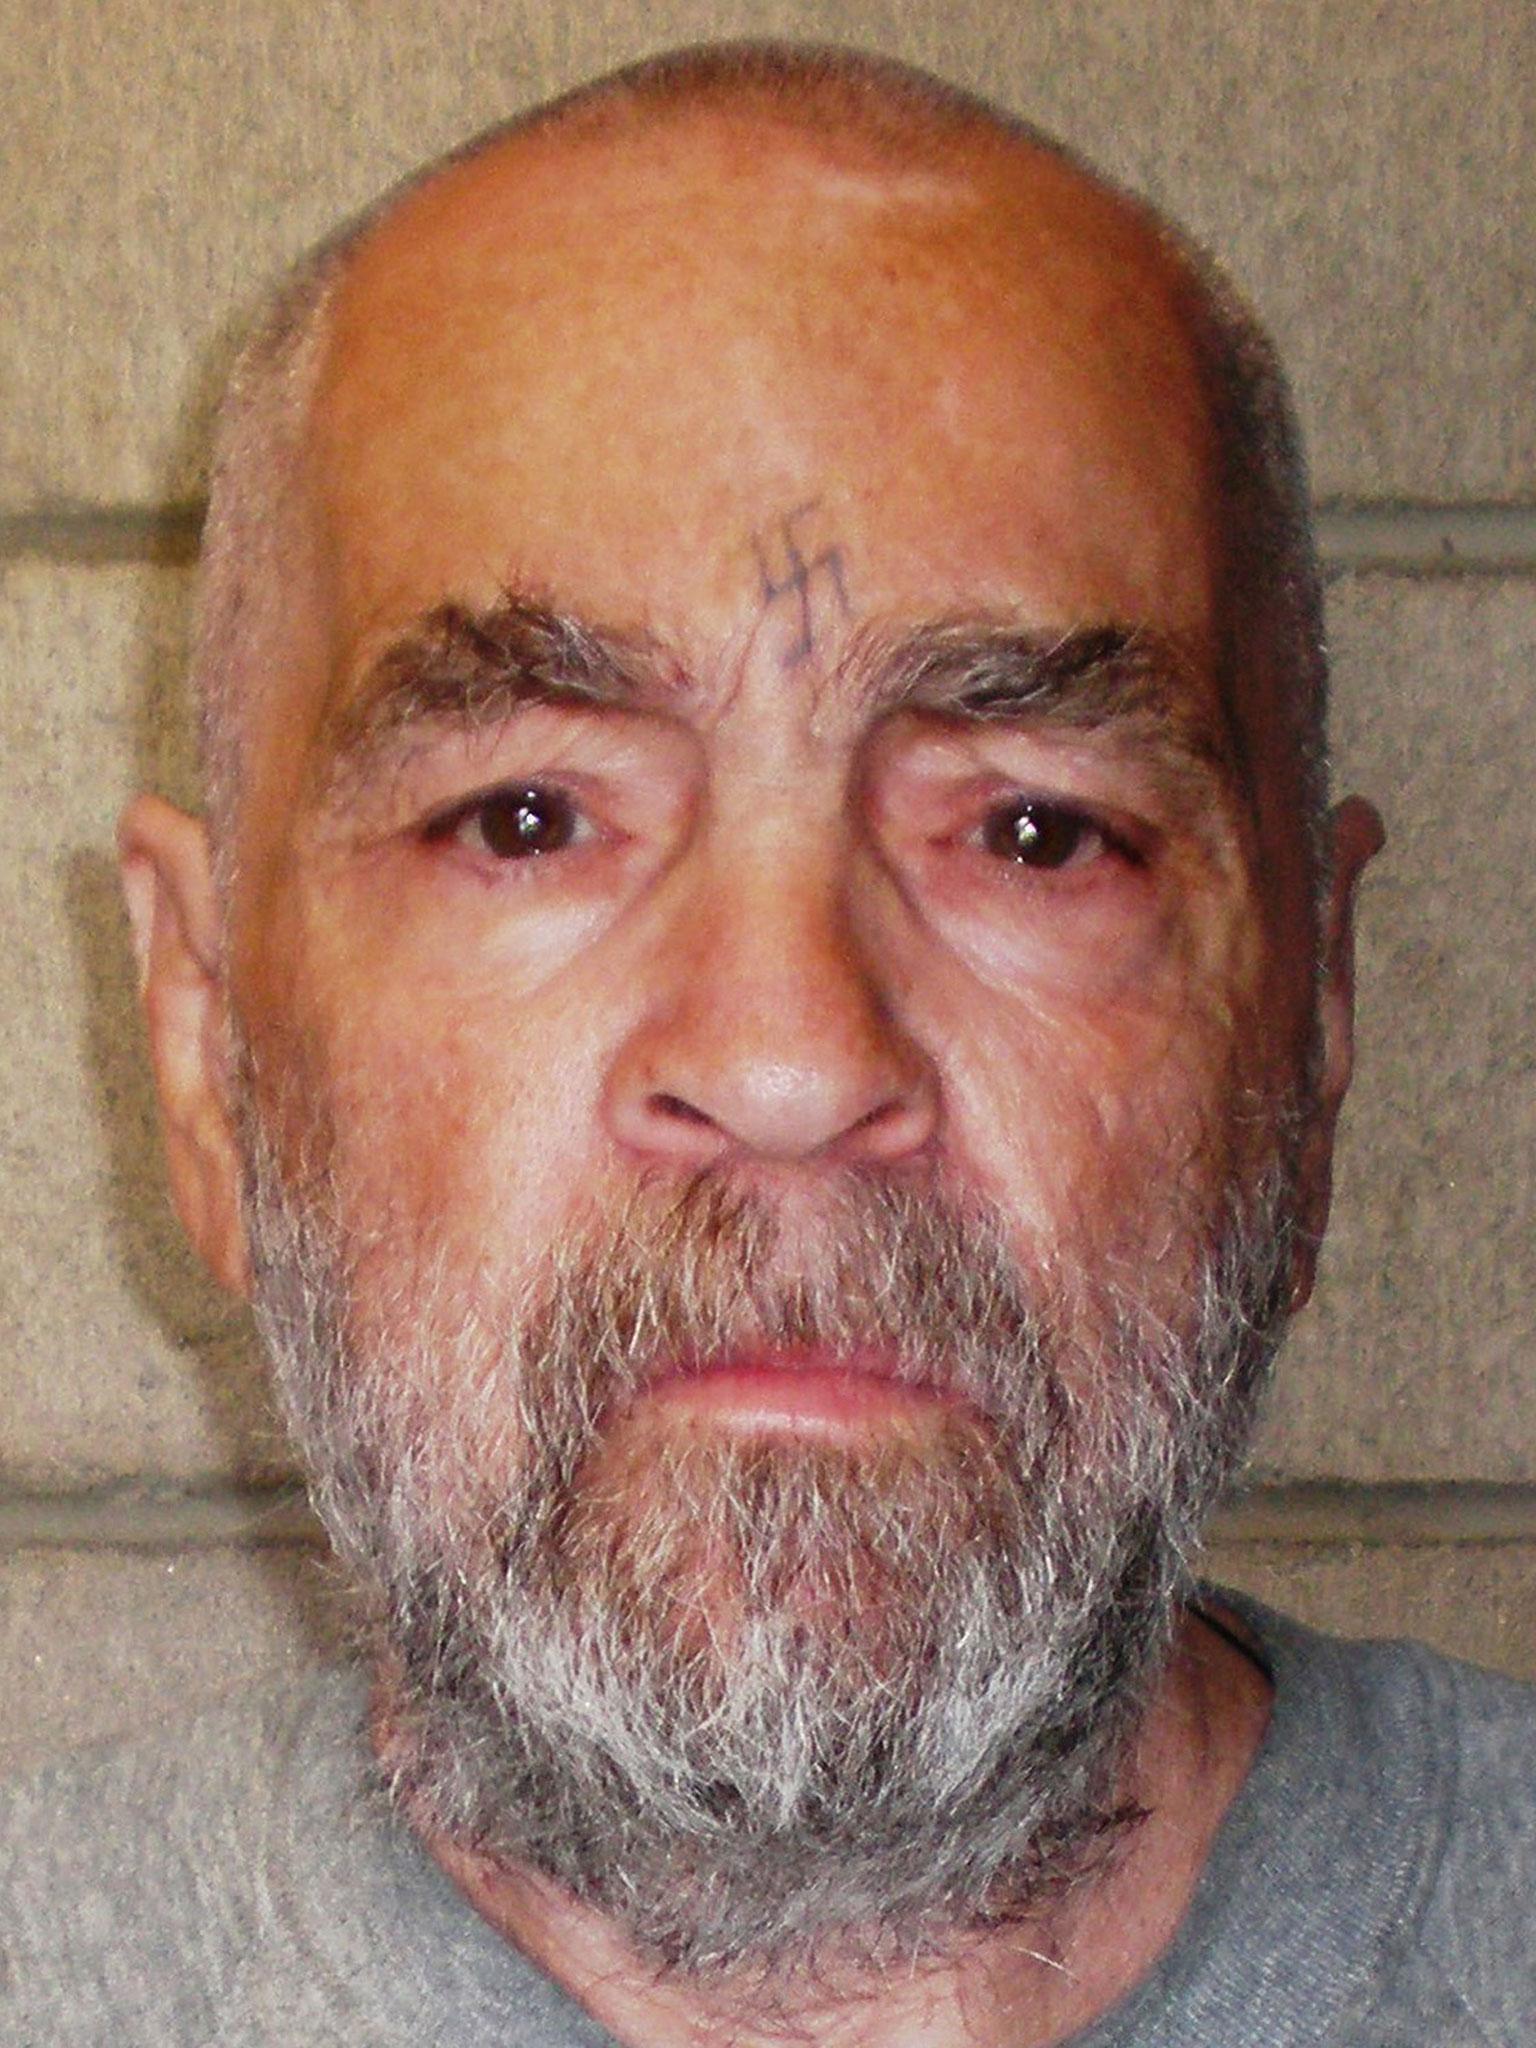 Details about   Charles Manson Who's Who Card Extra Game Card American Criminal & Cult Leader 